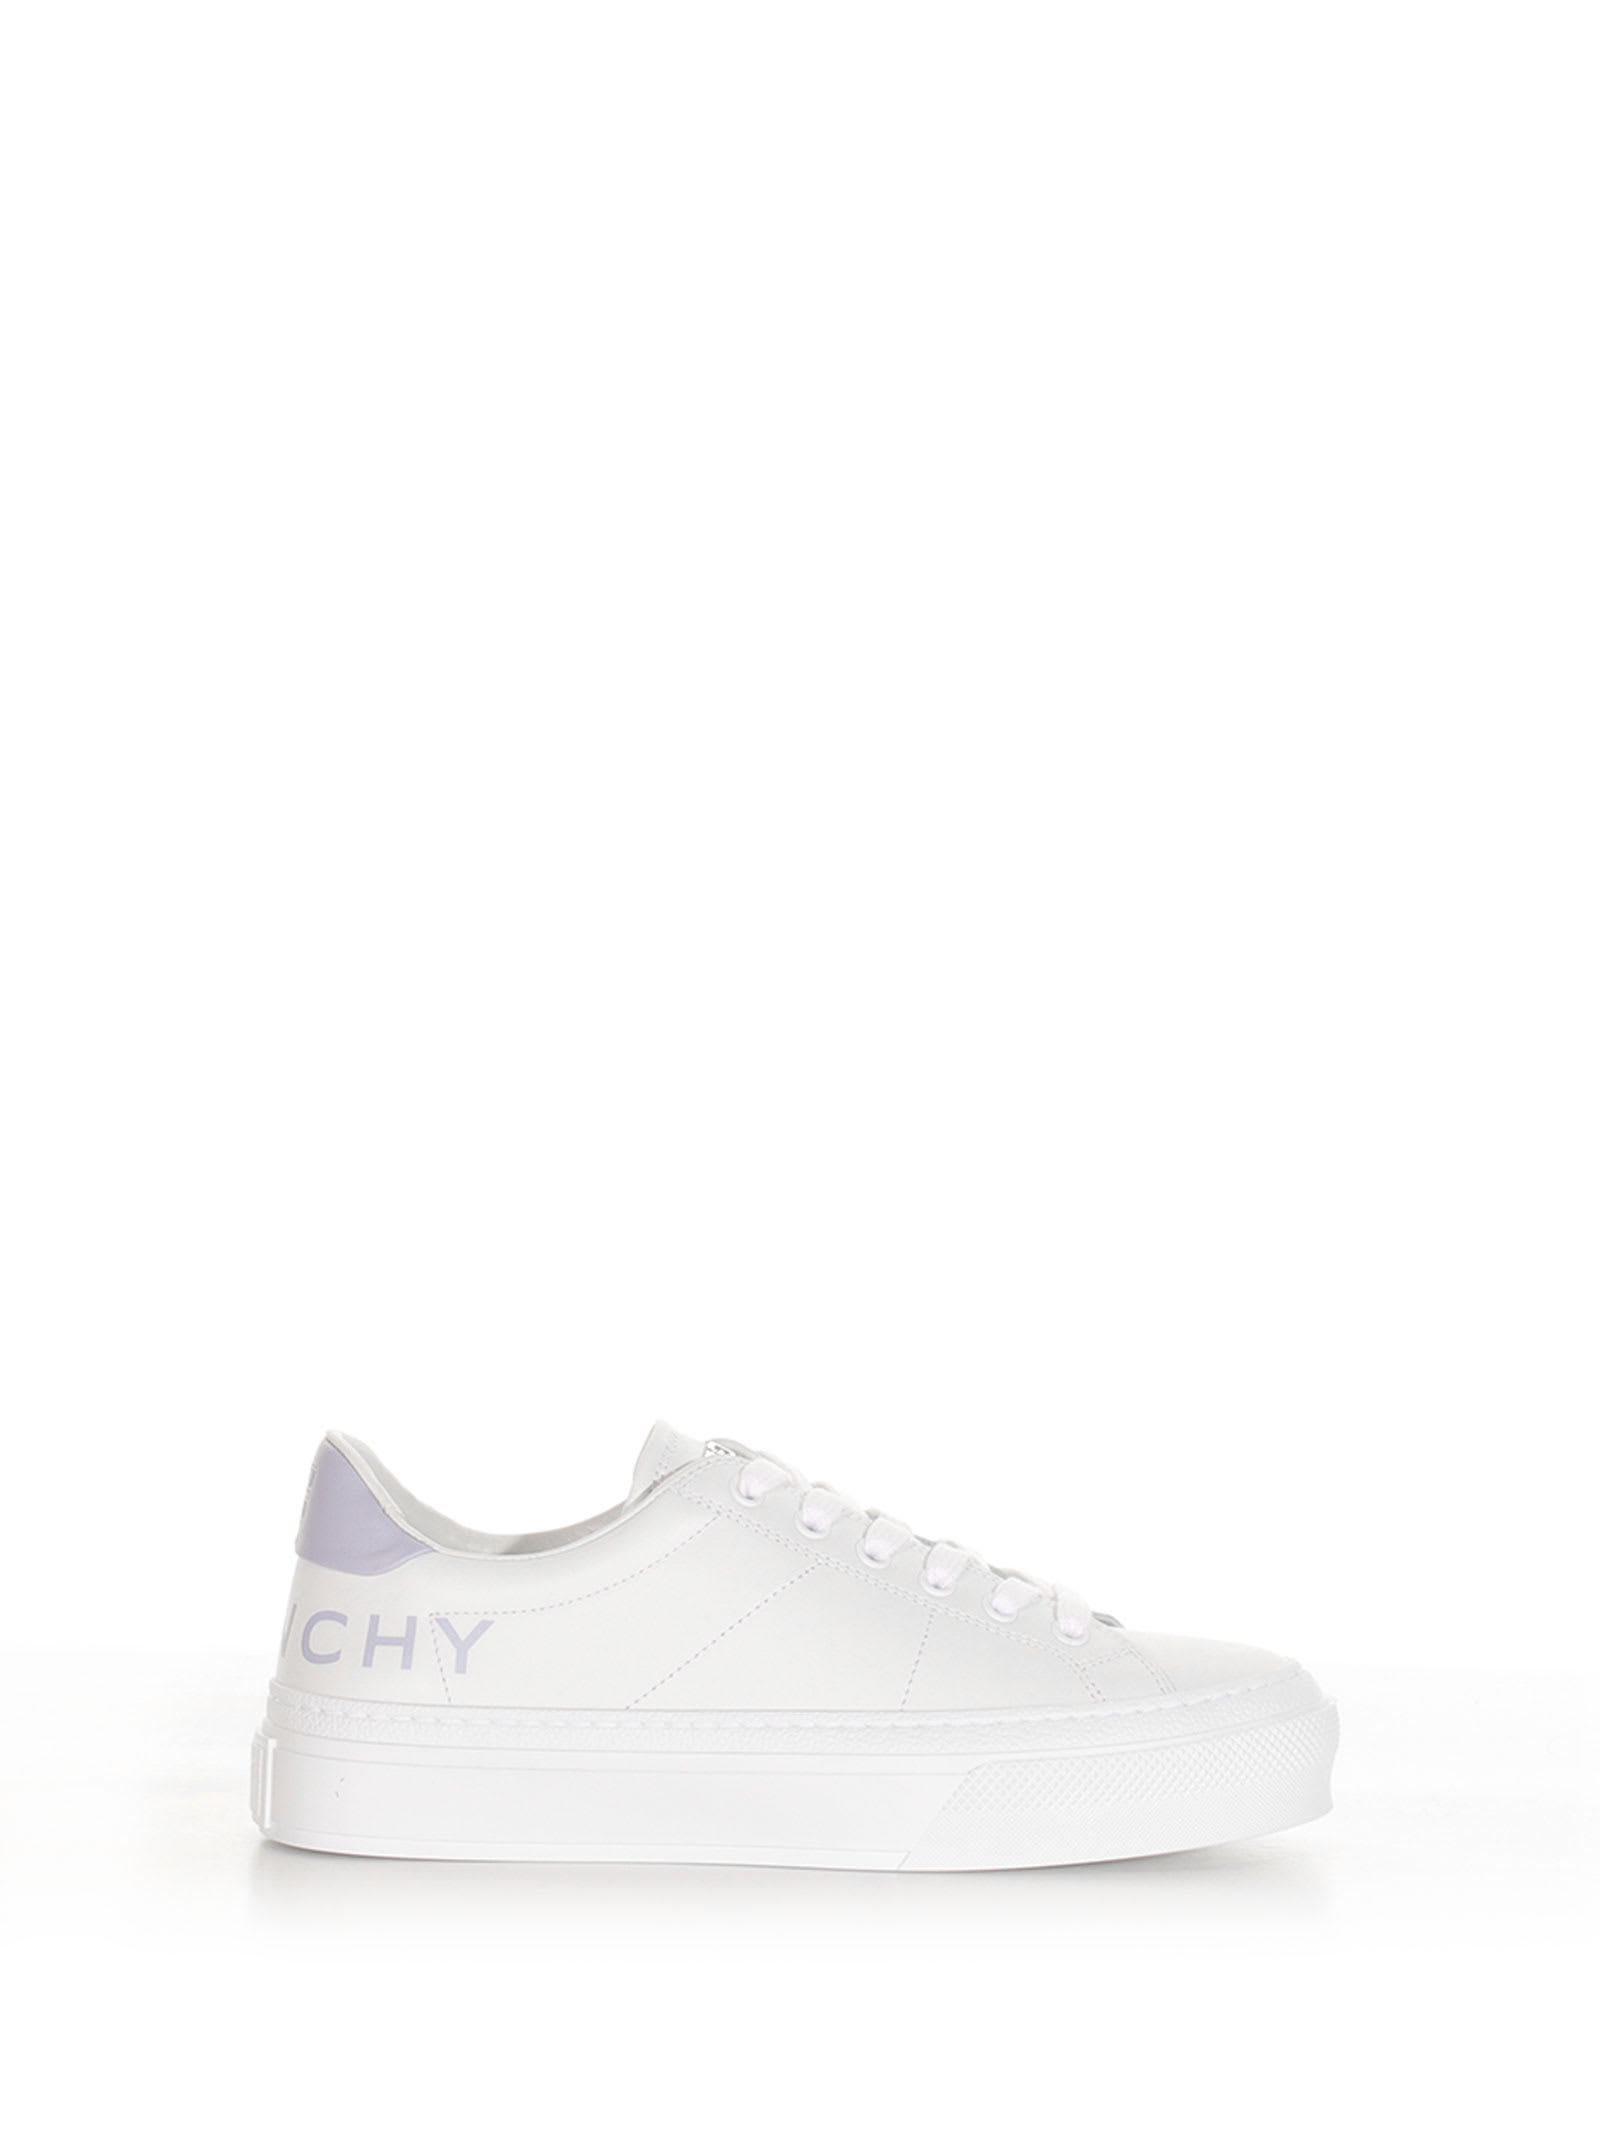 GIVENCHY CITY SPORT SNEAKER IN LEATHER